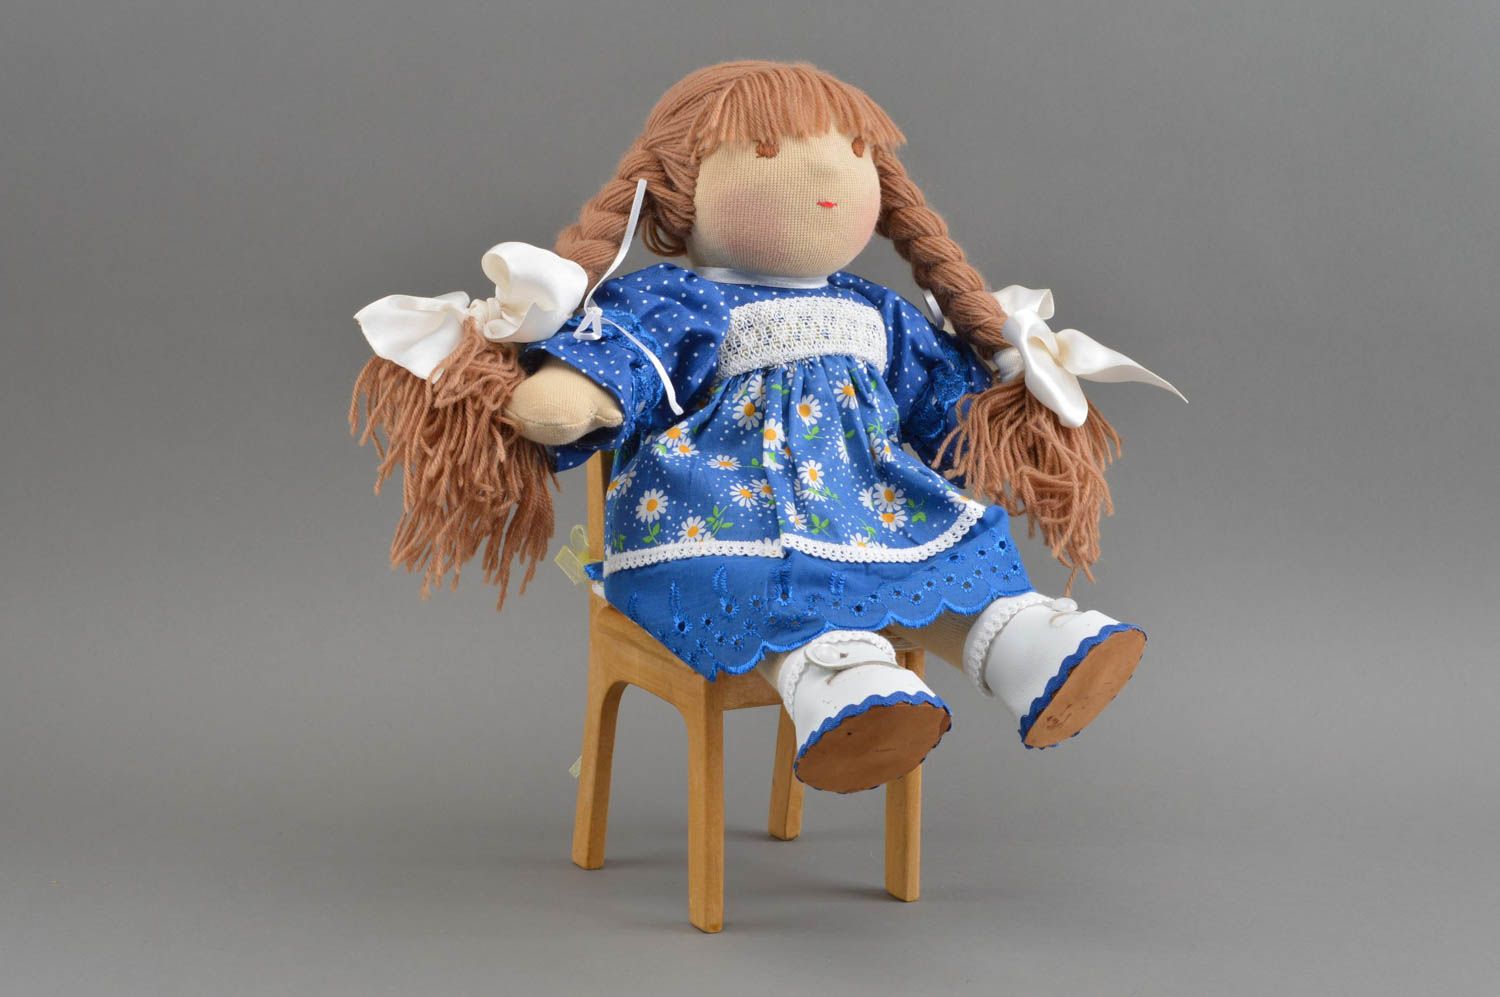 Fabric handmade doll in blue dress present for children stuffed toy for nursery photo 2